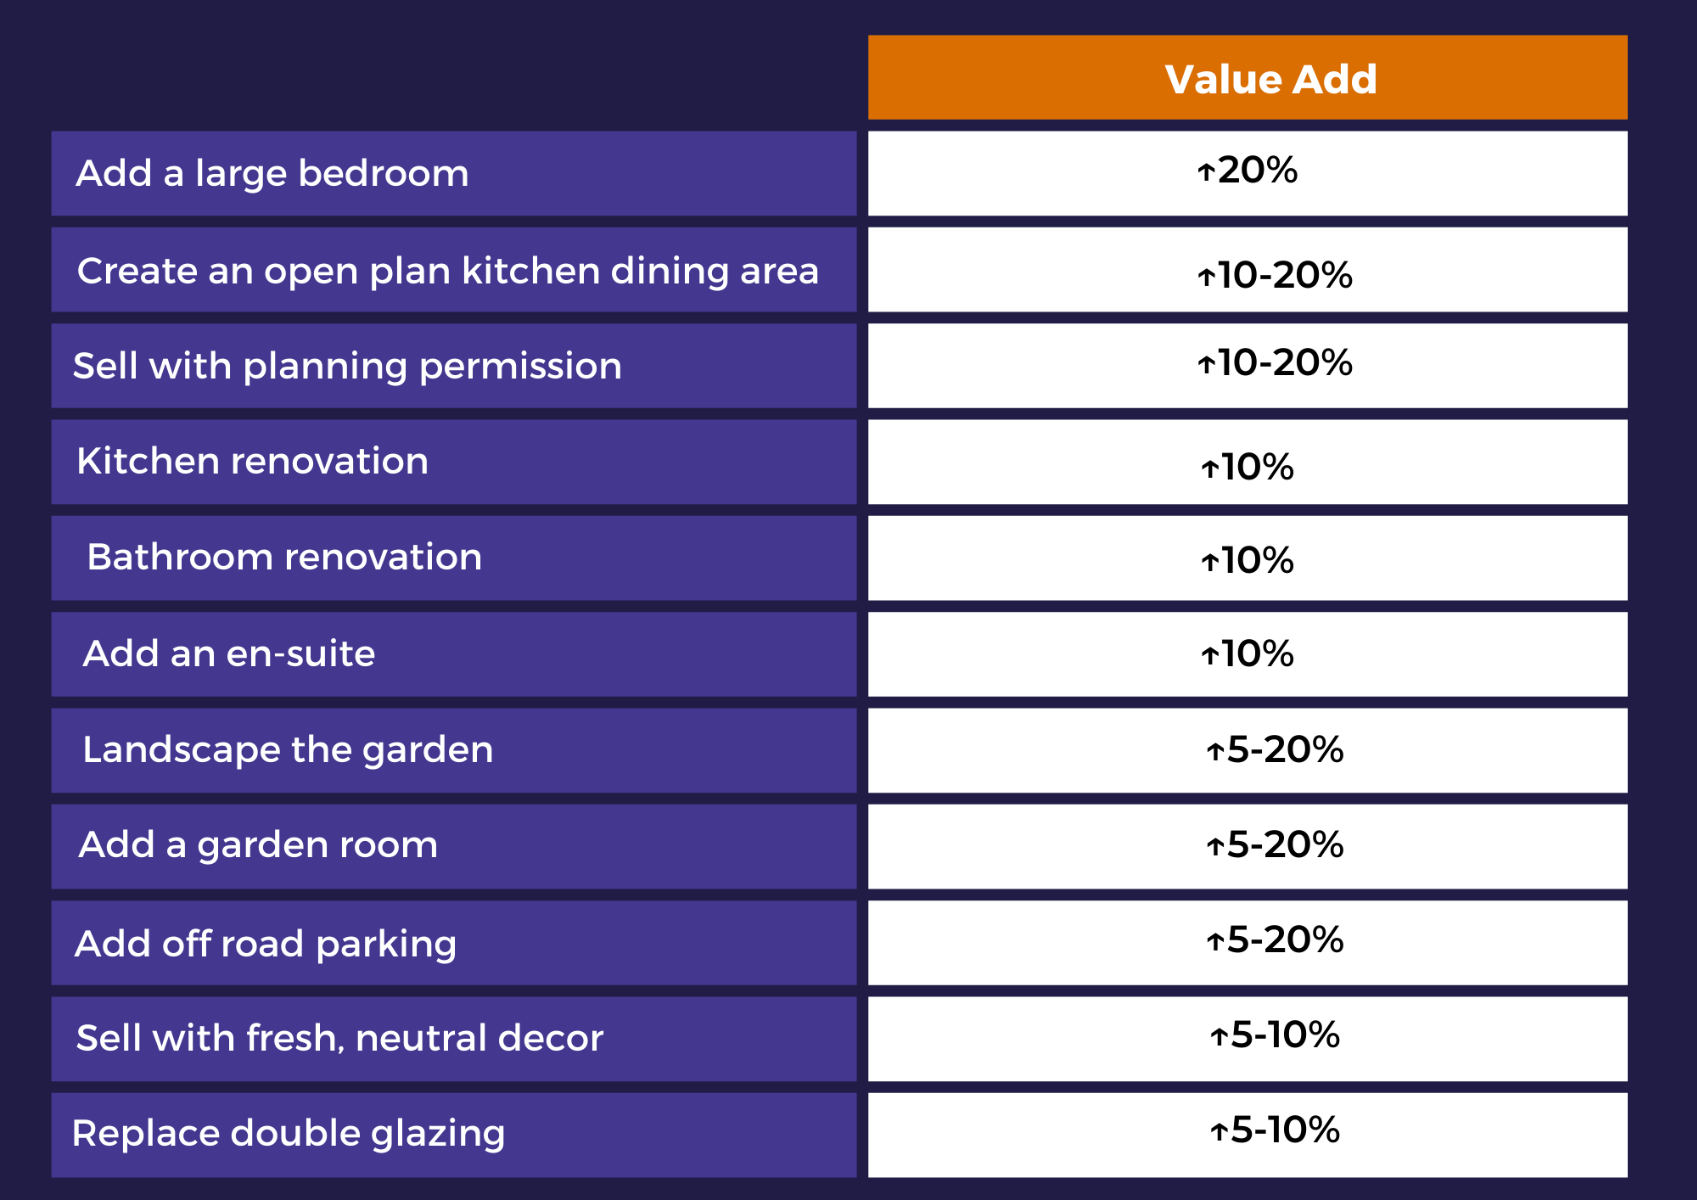 Table showing a summary of what work adds the most value to a house in the UK